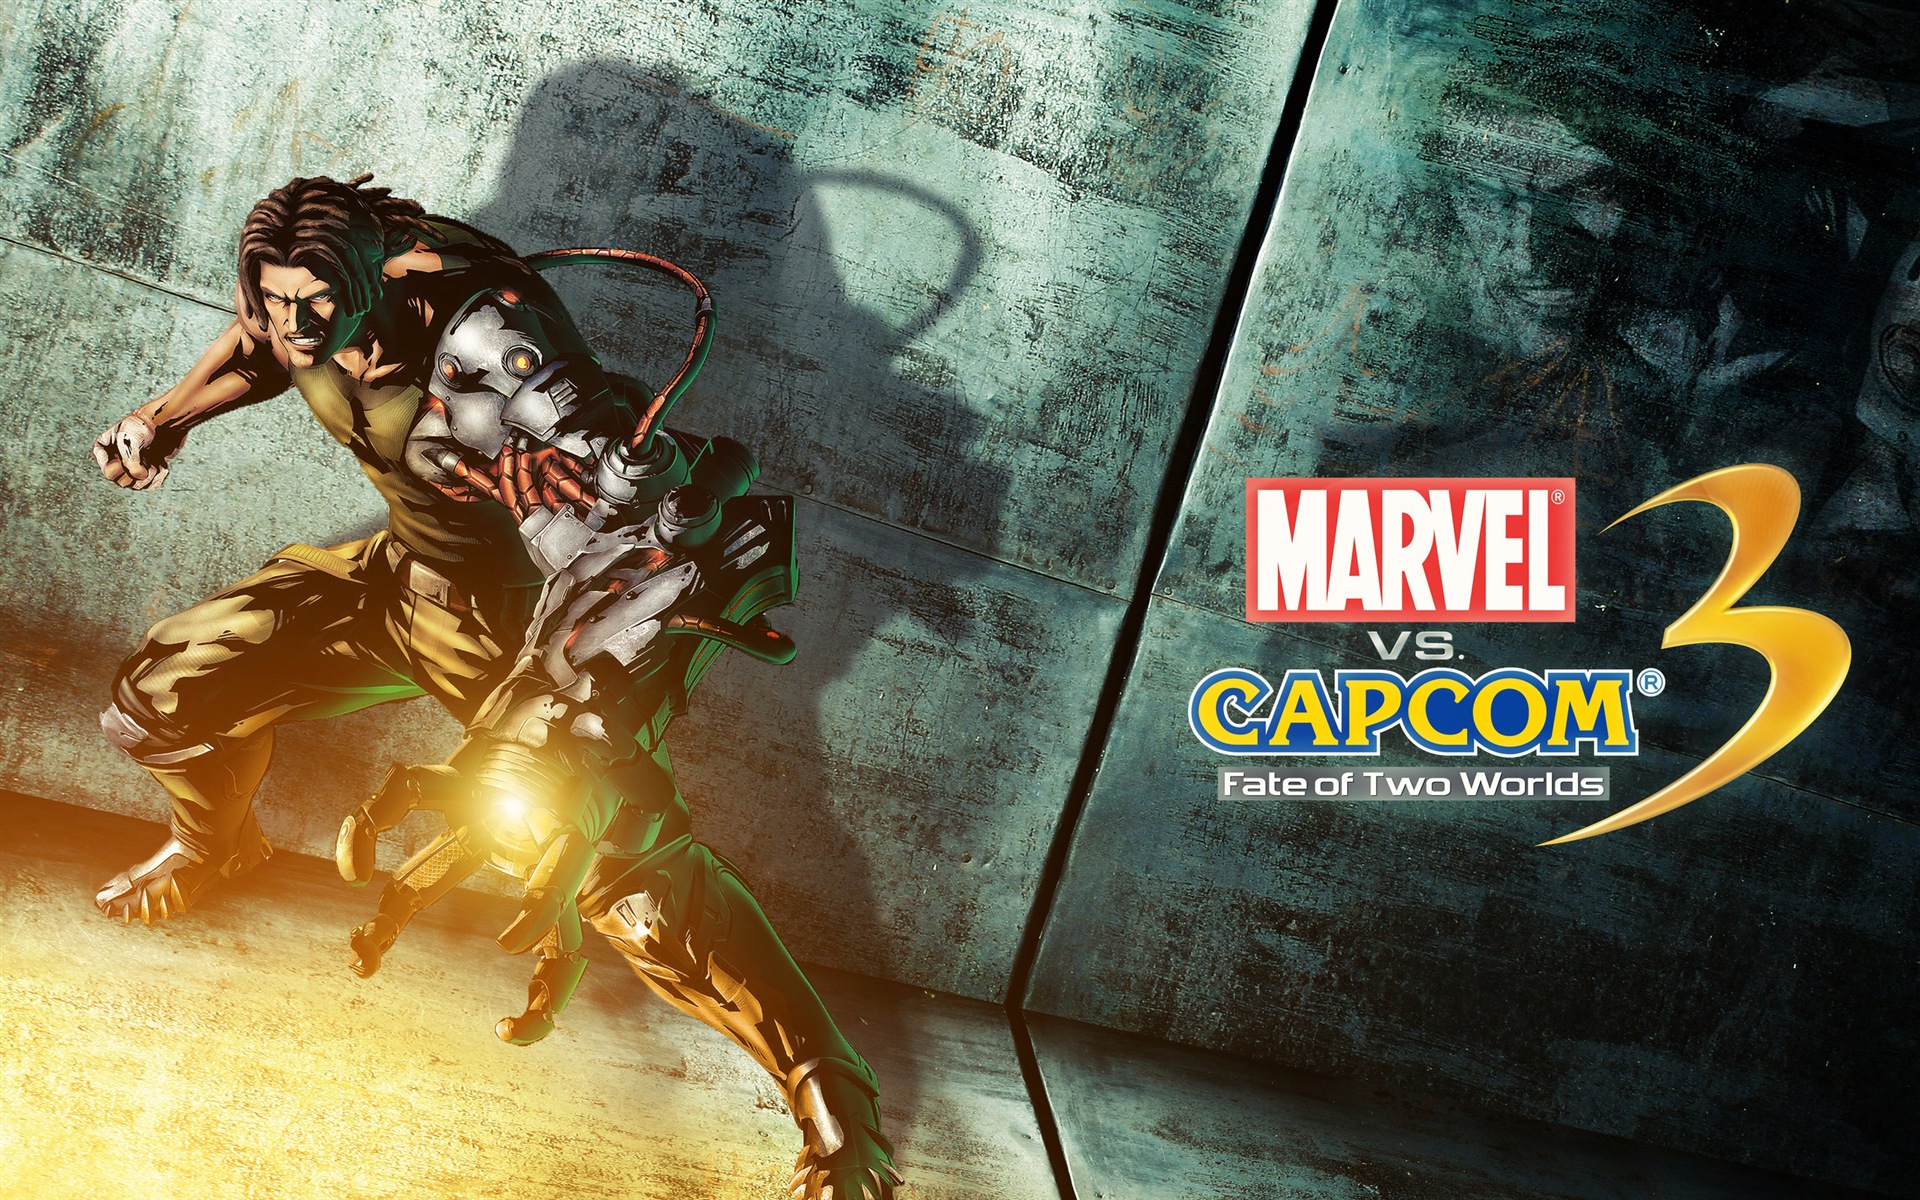 Marvel VS. Capcom 3: Fate of Two Worlds HD game wallpapers #8 - 1920x1200